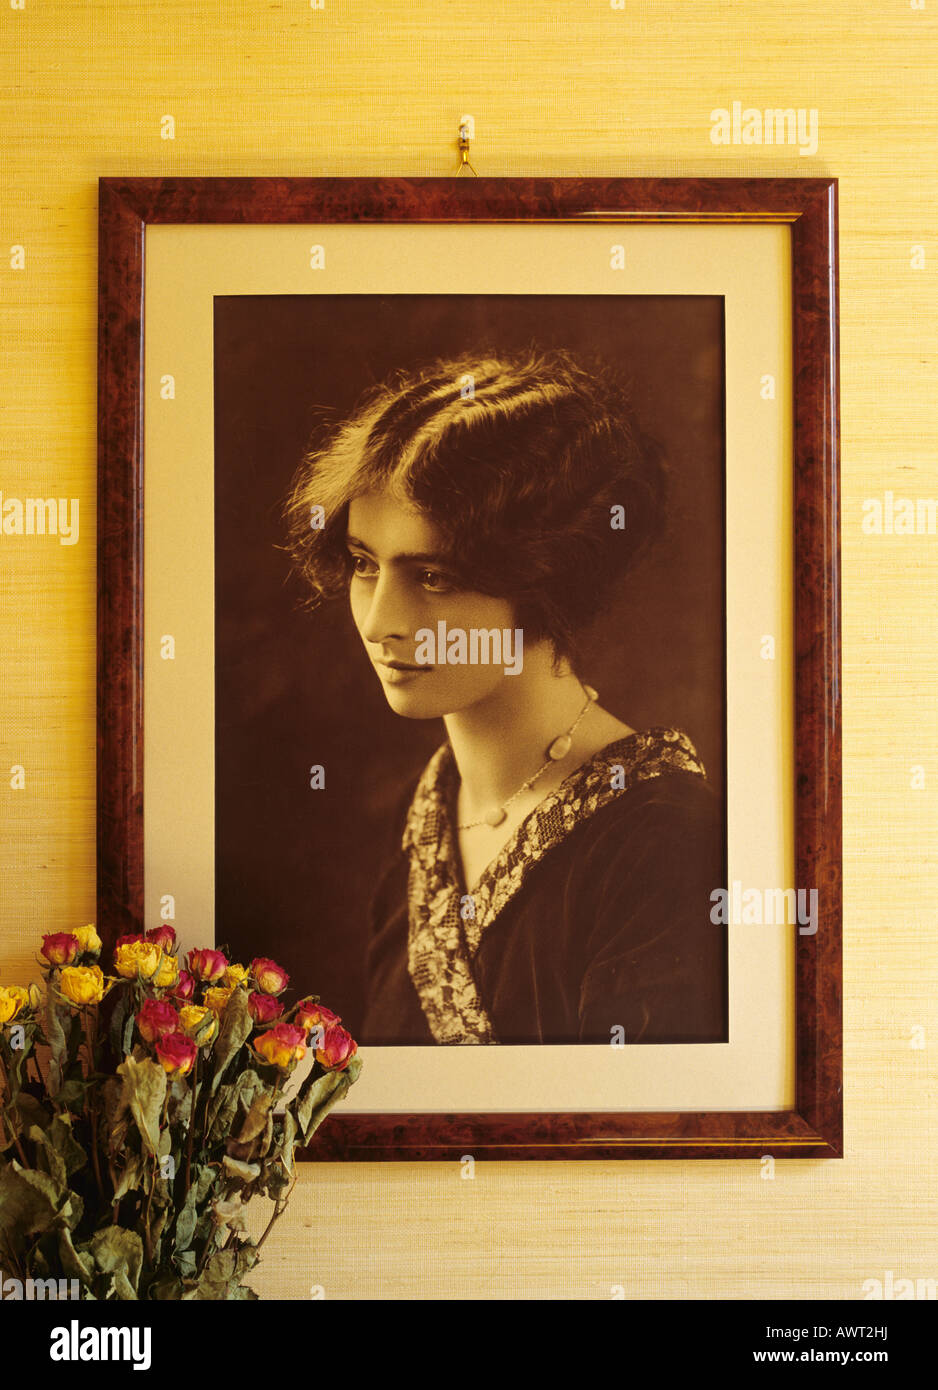 1920's vintage framed portrait of a young woman and dried roses flowers Stock Photo